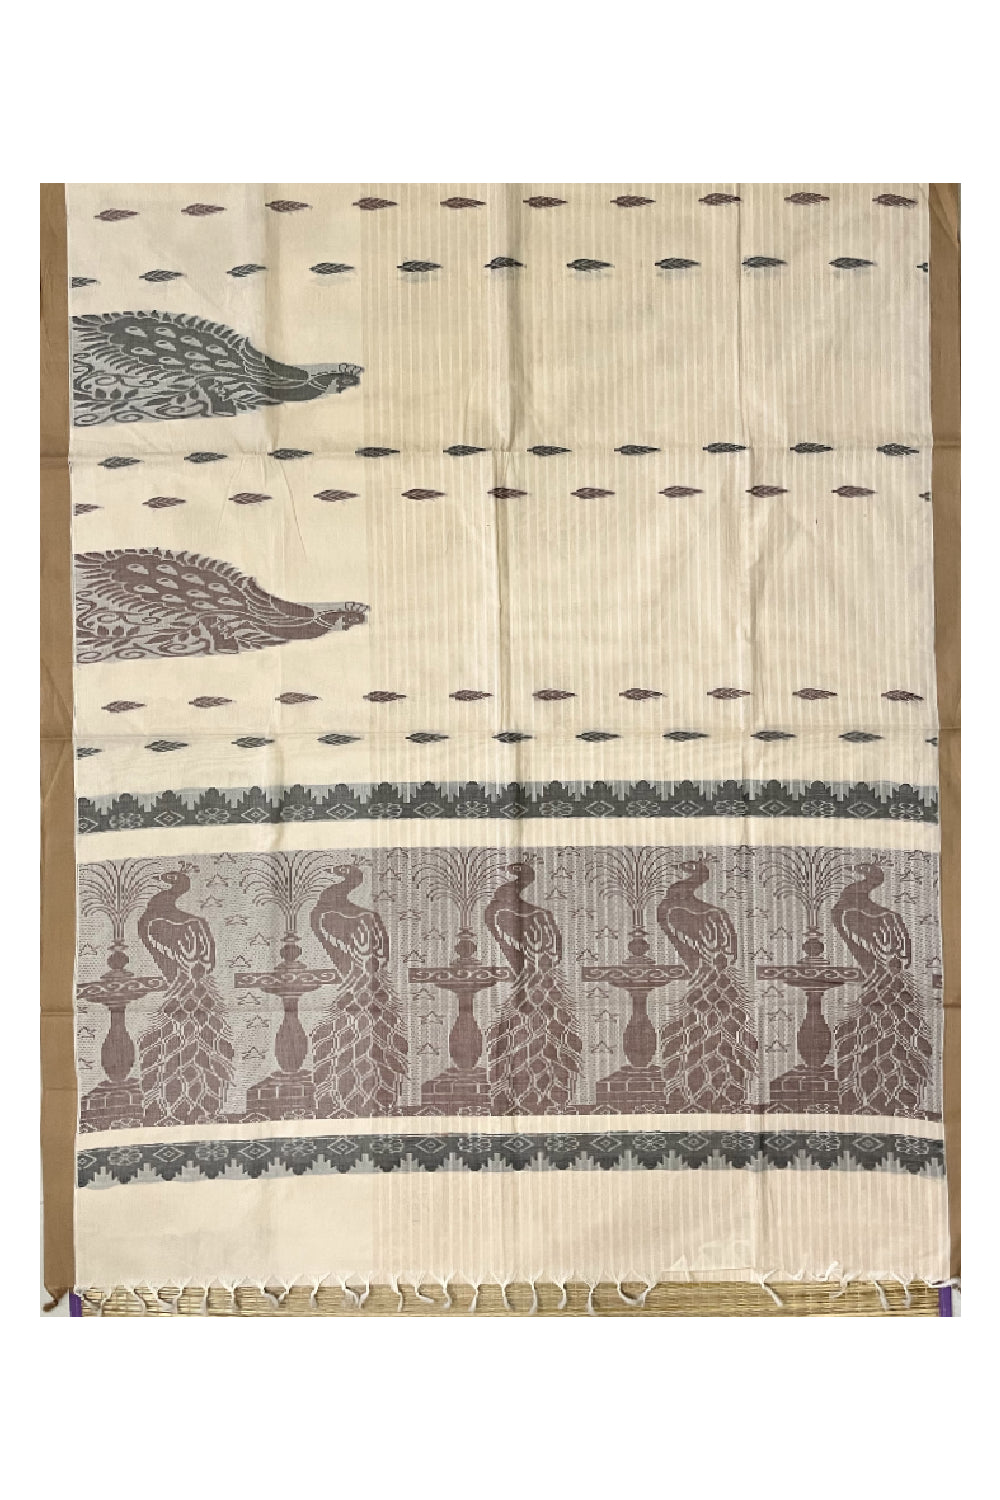 Southloom Light Brown Cotton Saree with Peacock Woven Designs